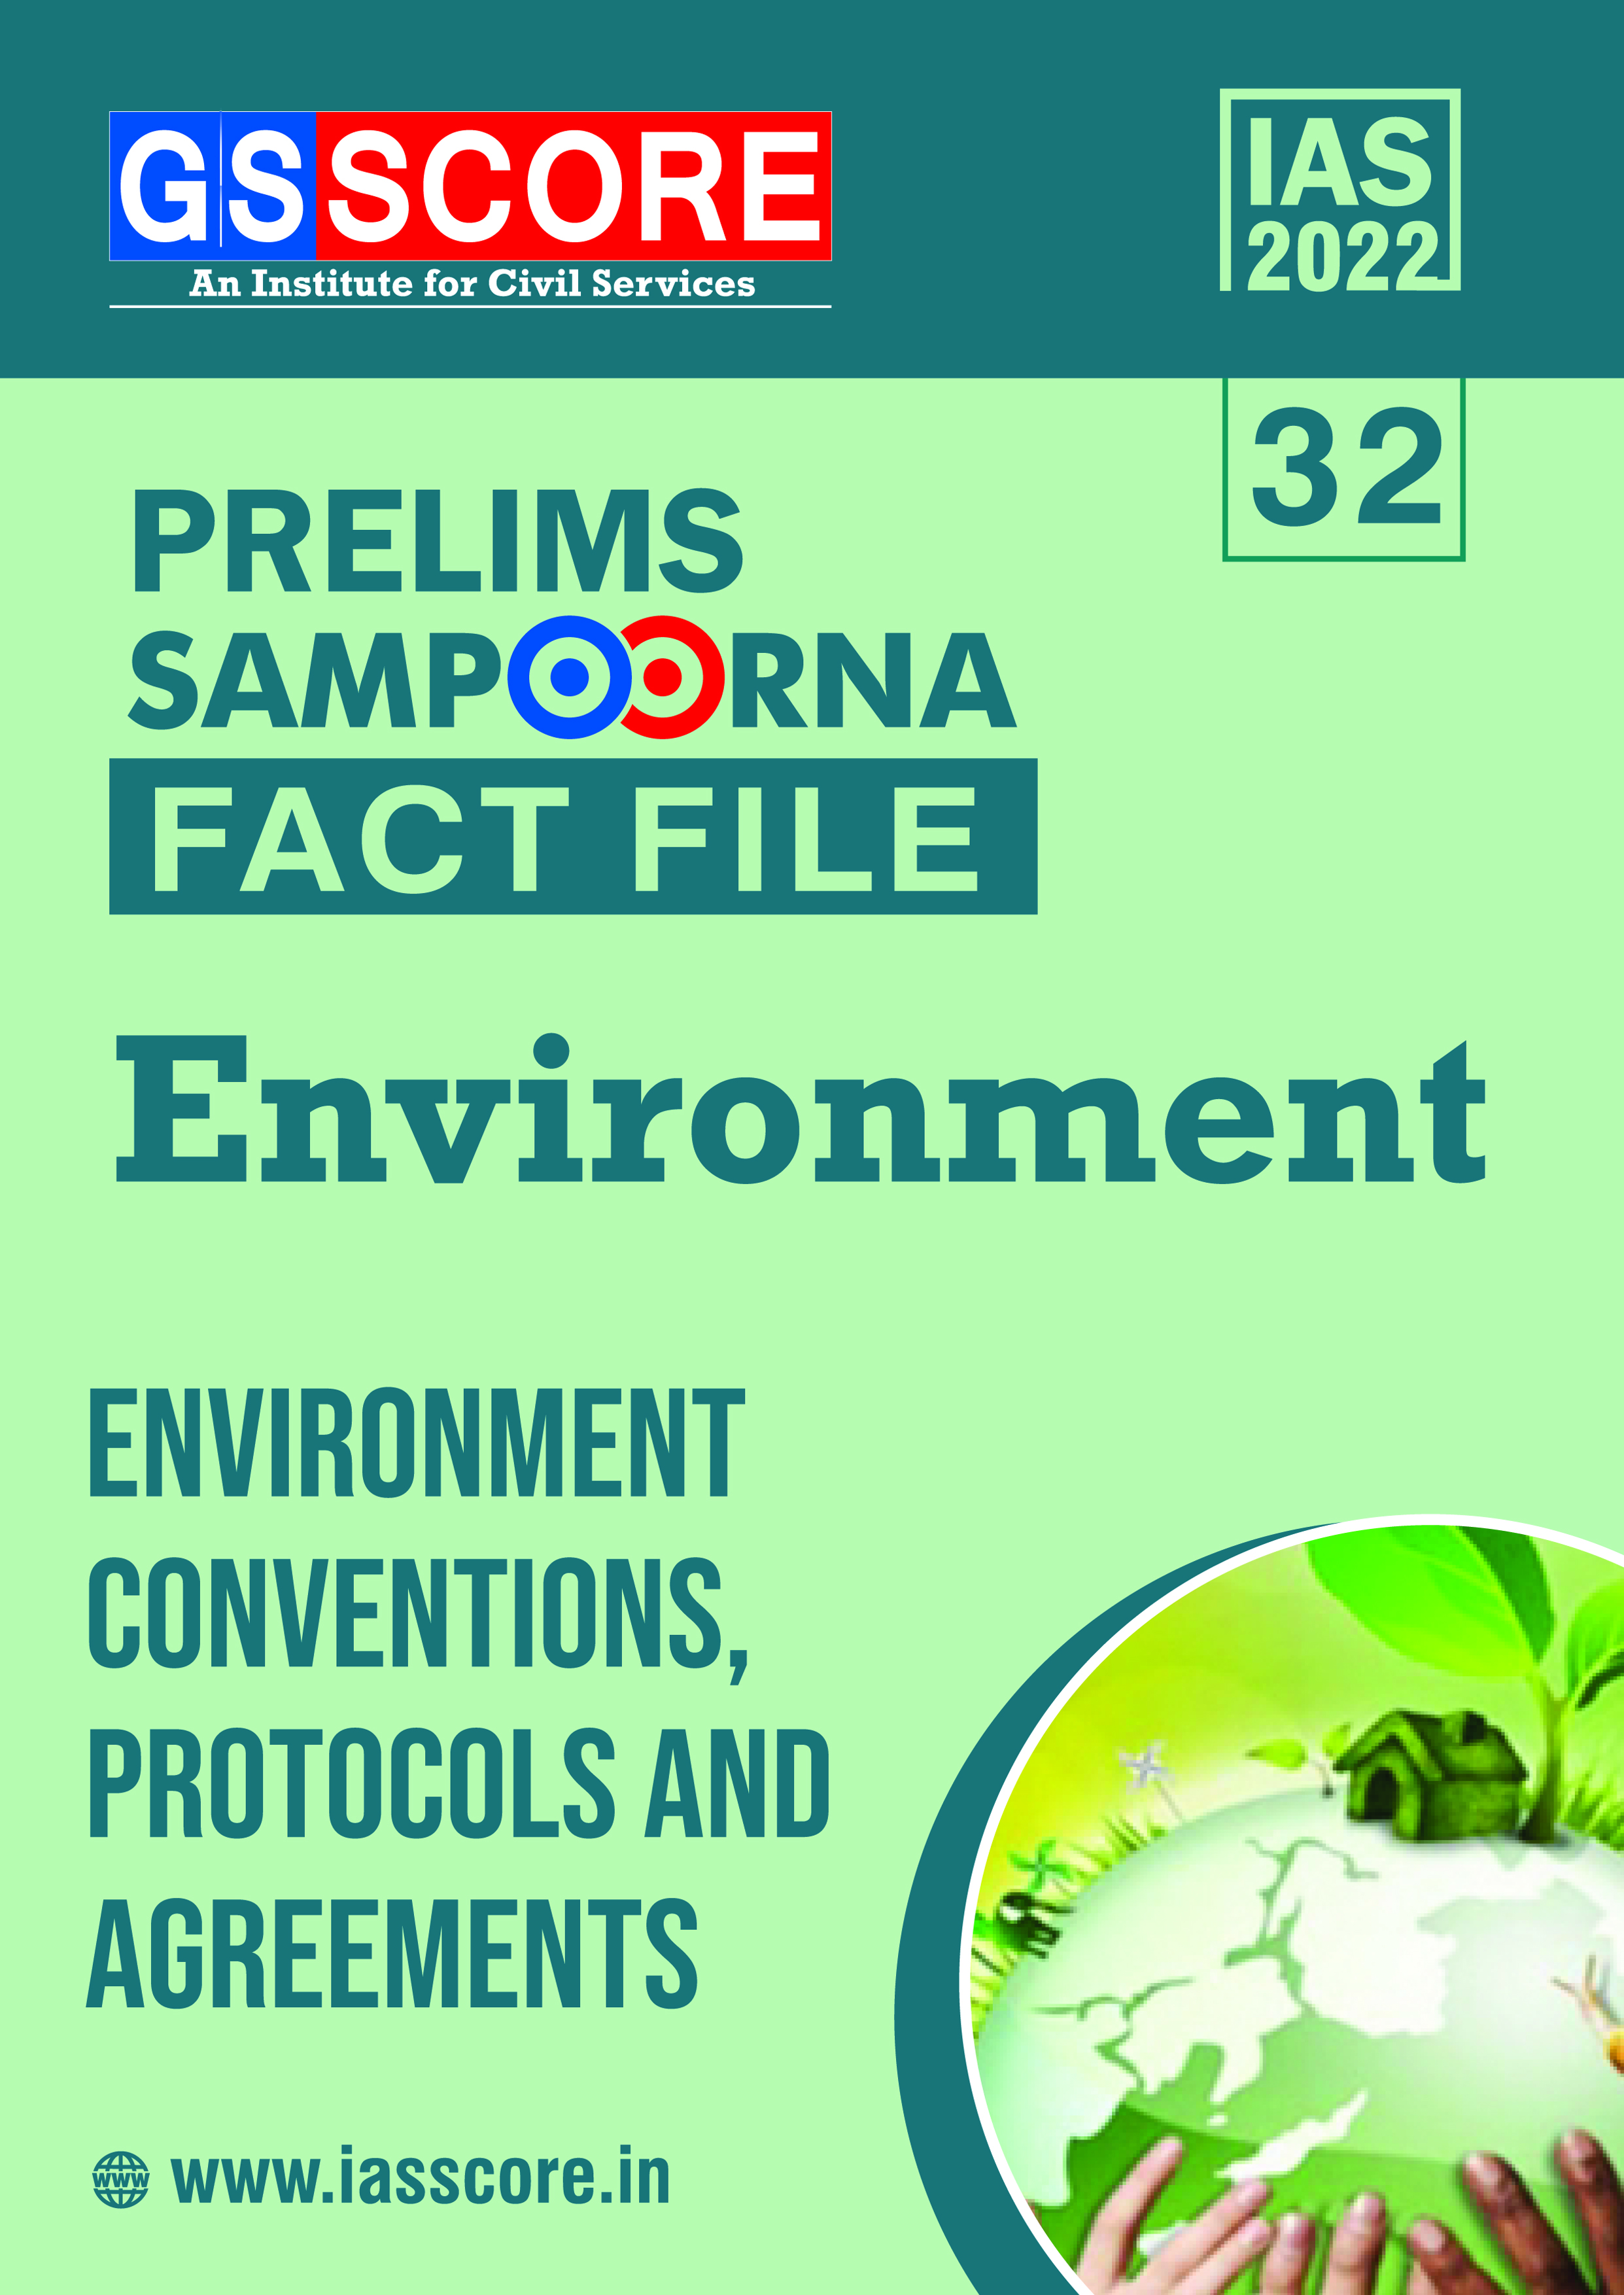 Fact File: Environment Conventions, Protocols, and Agreements